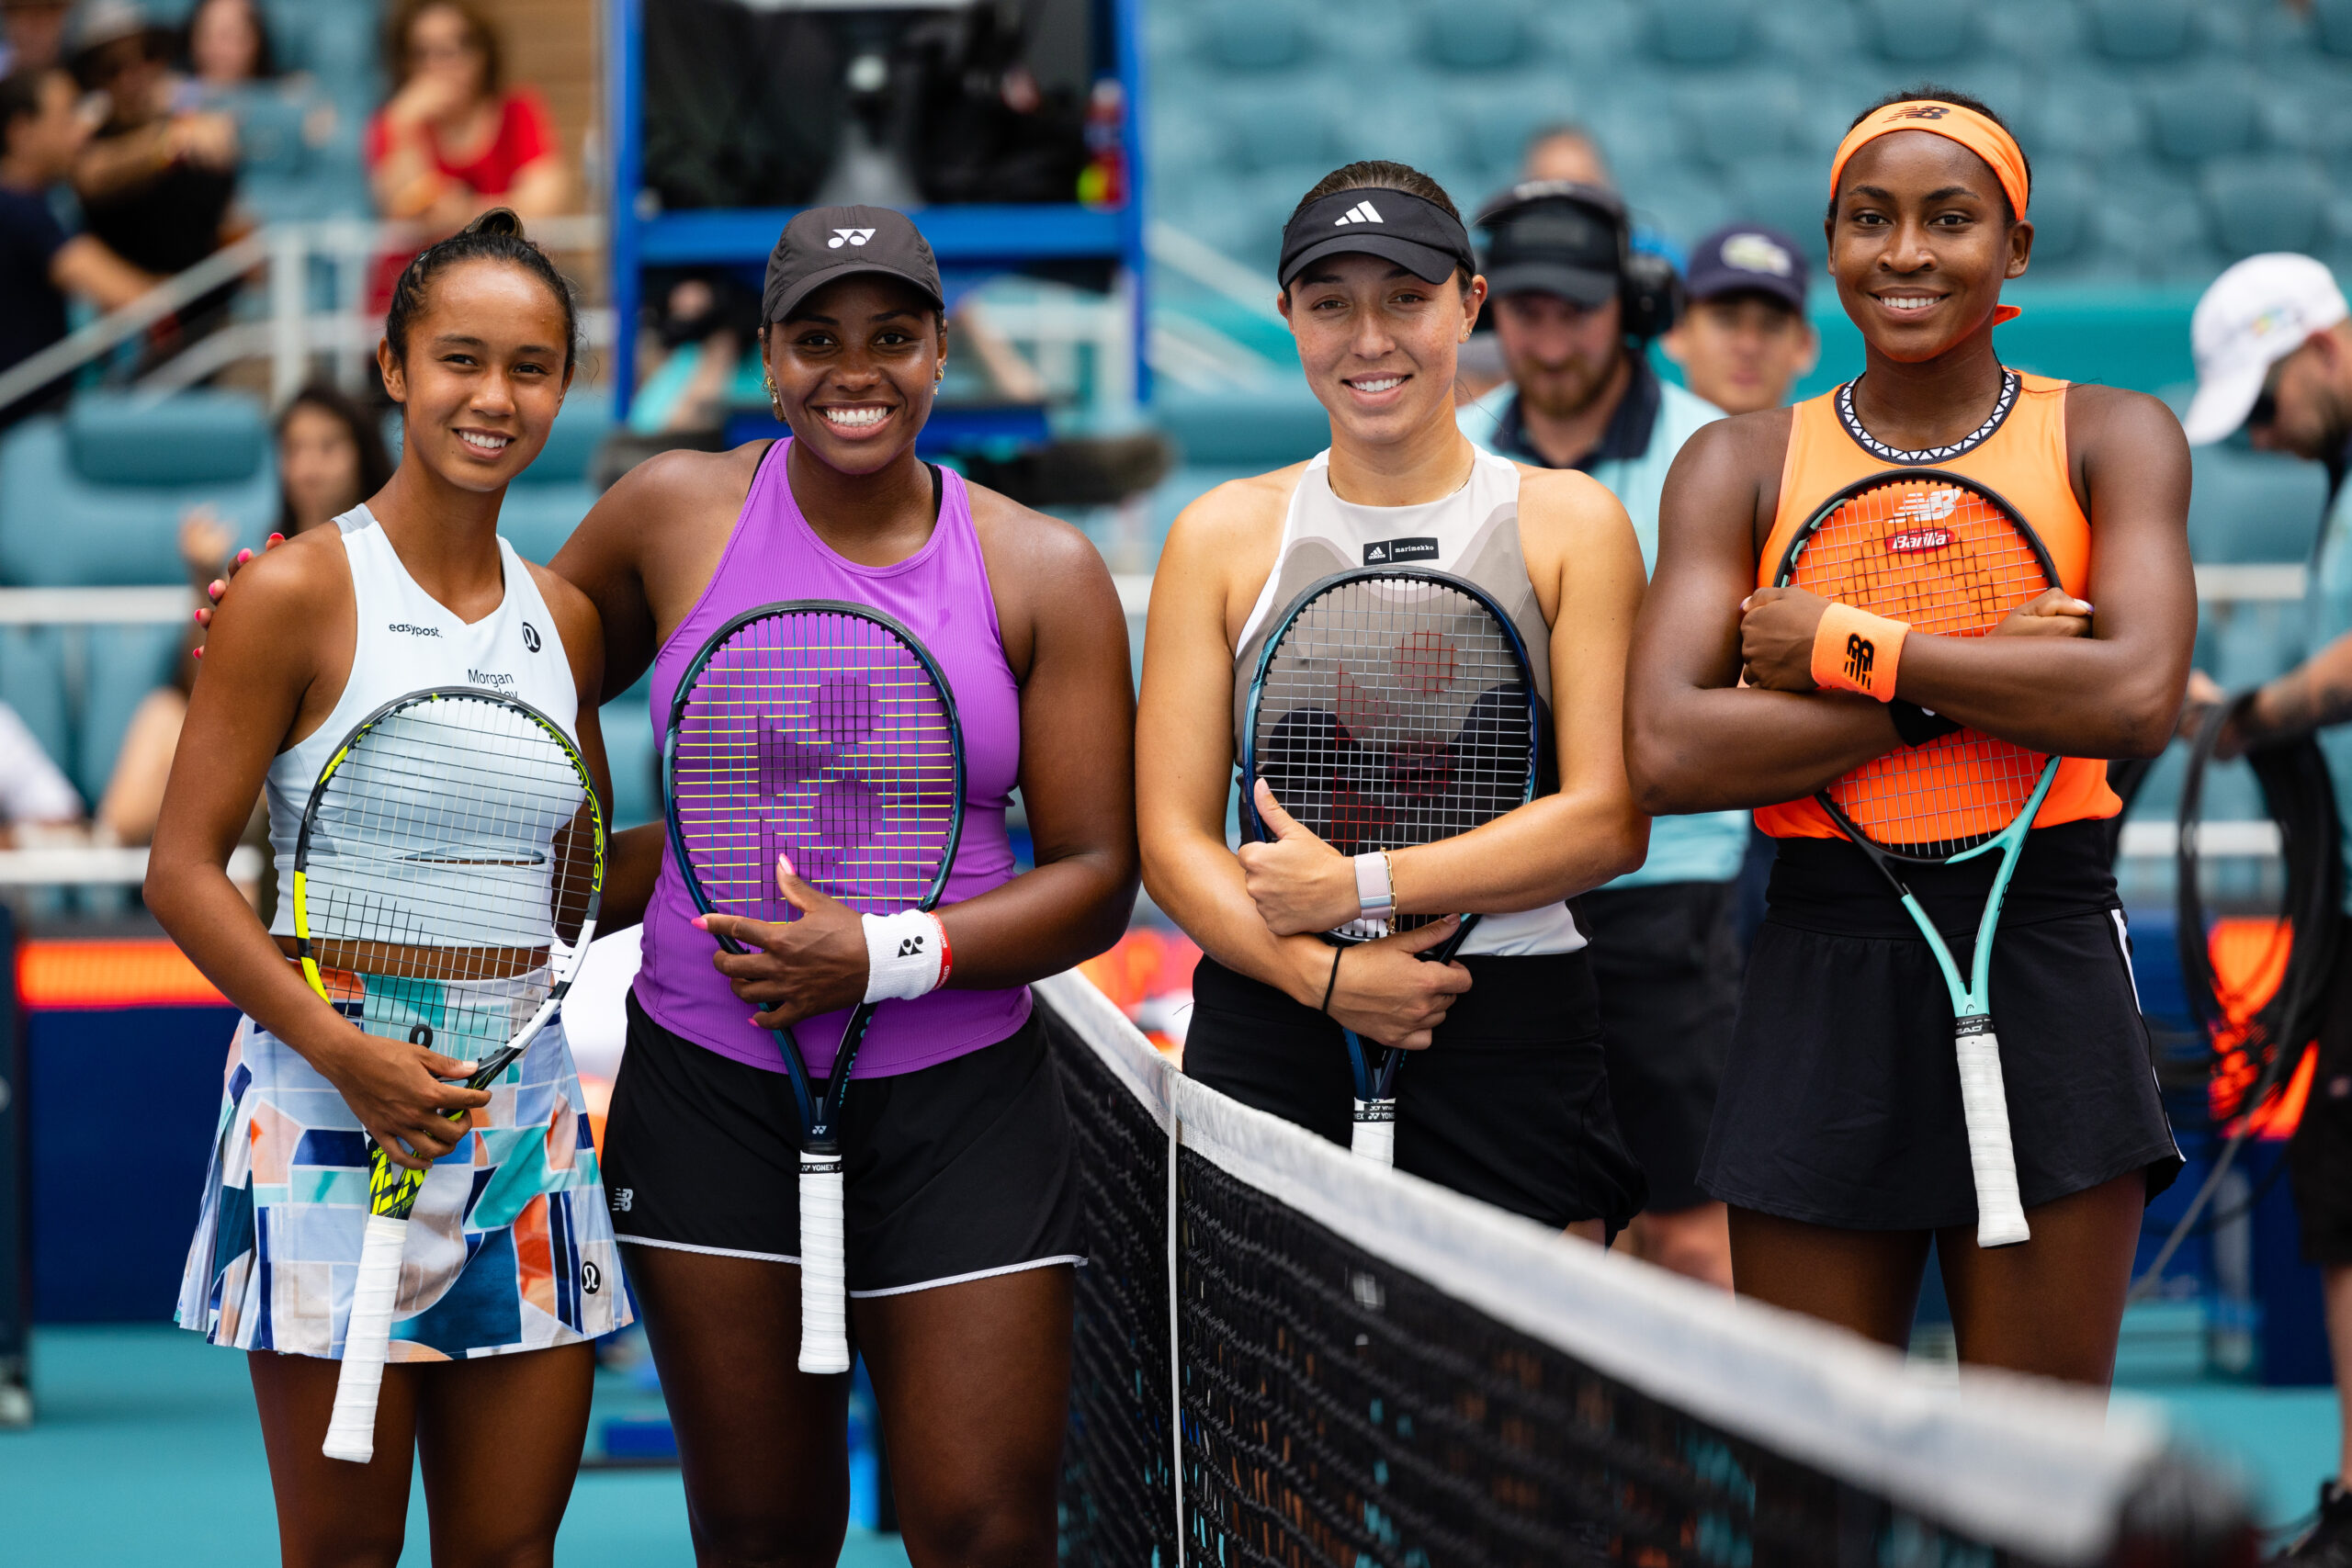 Pre-match photo, l-r: Leylah Fernandez, Taylor Townsend, Jessica Pegula and Coco Gauff before the 2023 Women's Doubles Final match on April 2, 2023 at the Miami Open.